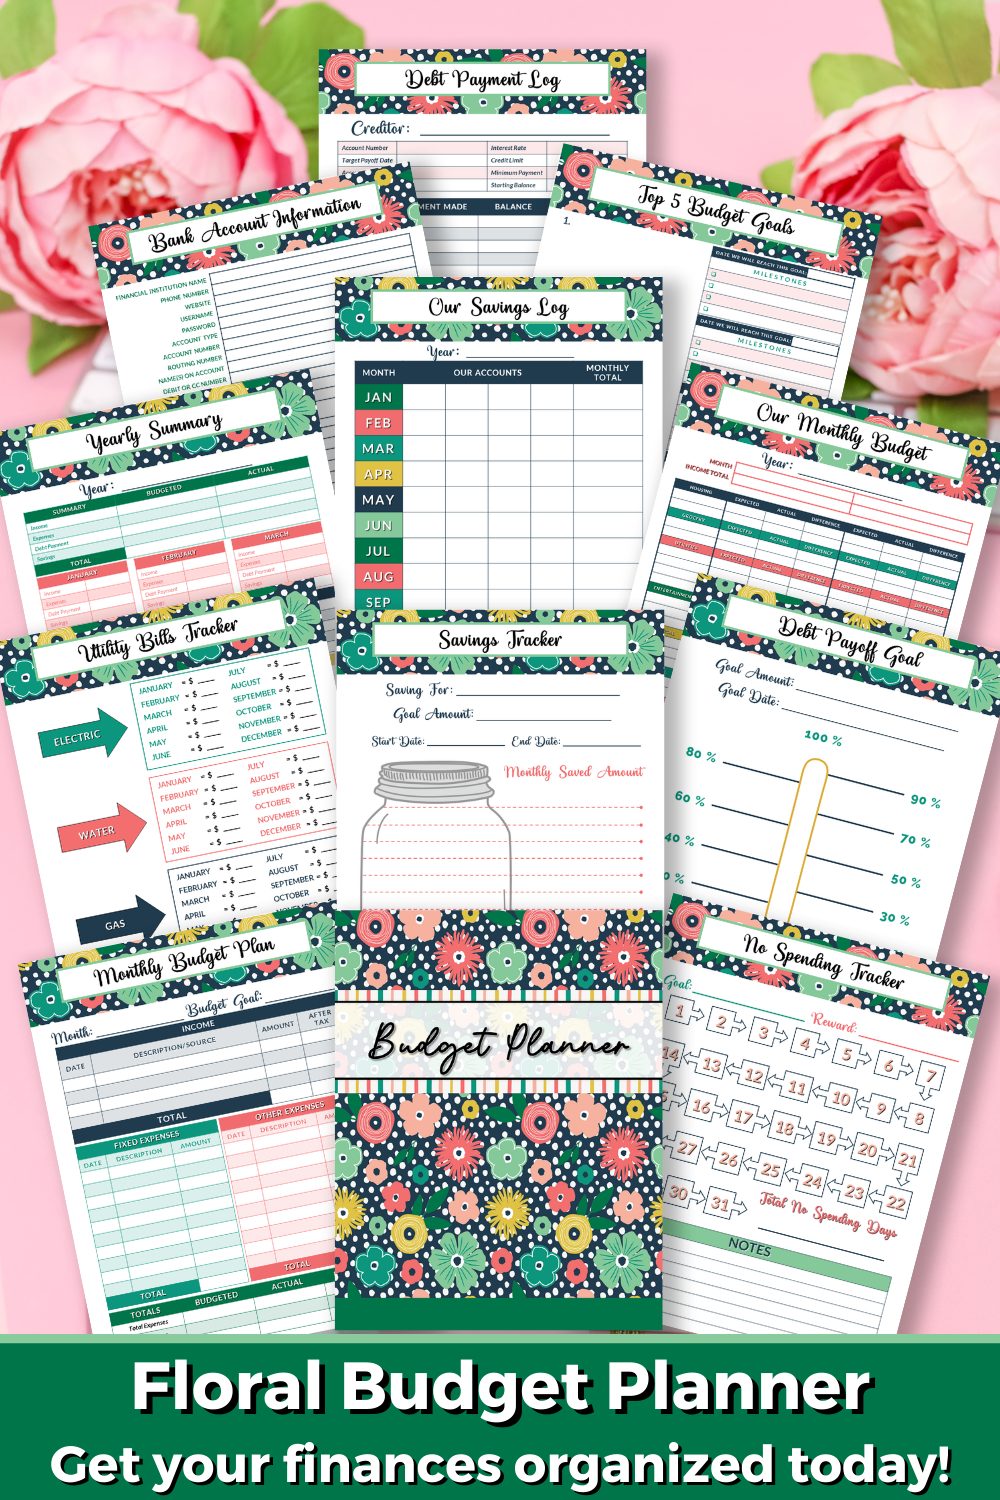 Printable Floral Budget Planner pages showing the different things inside the budget planner.